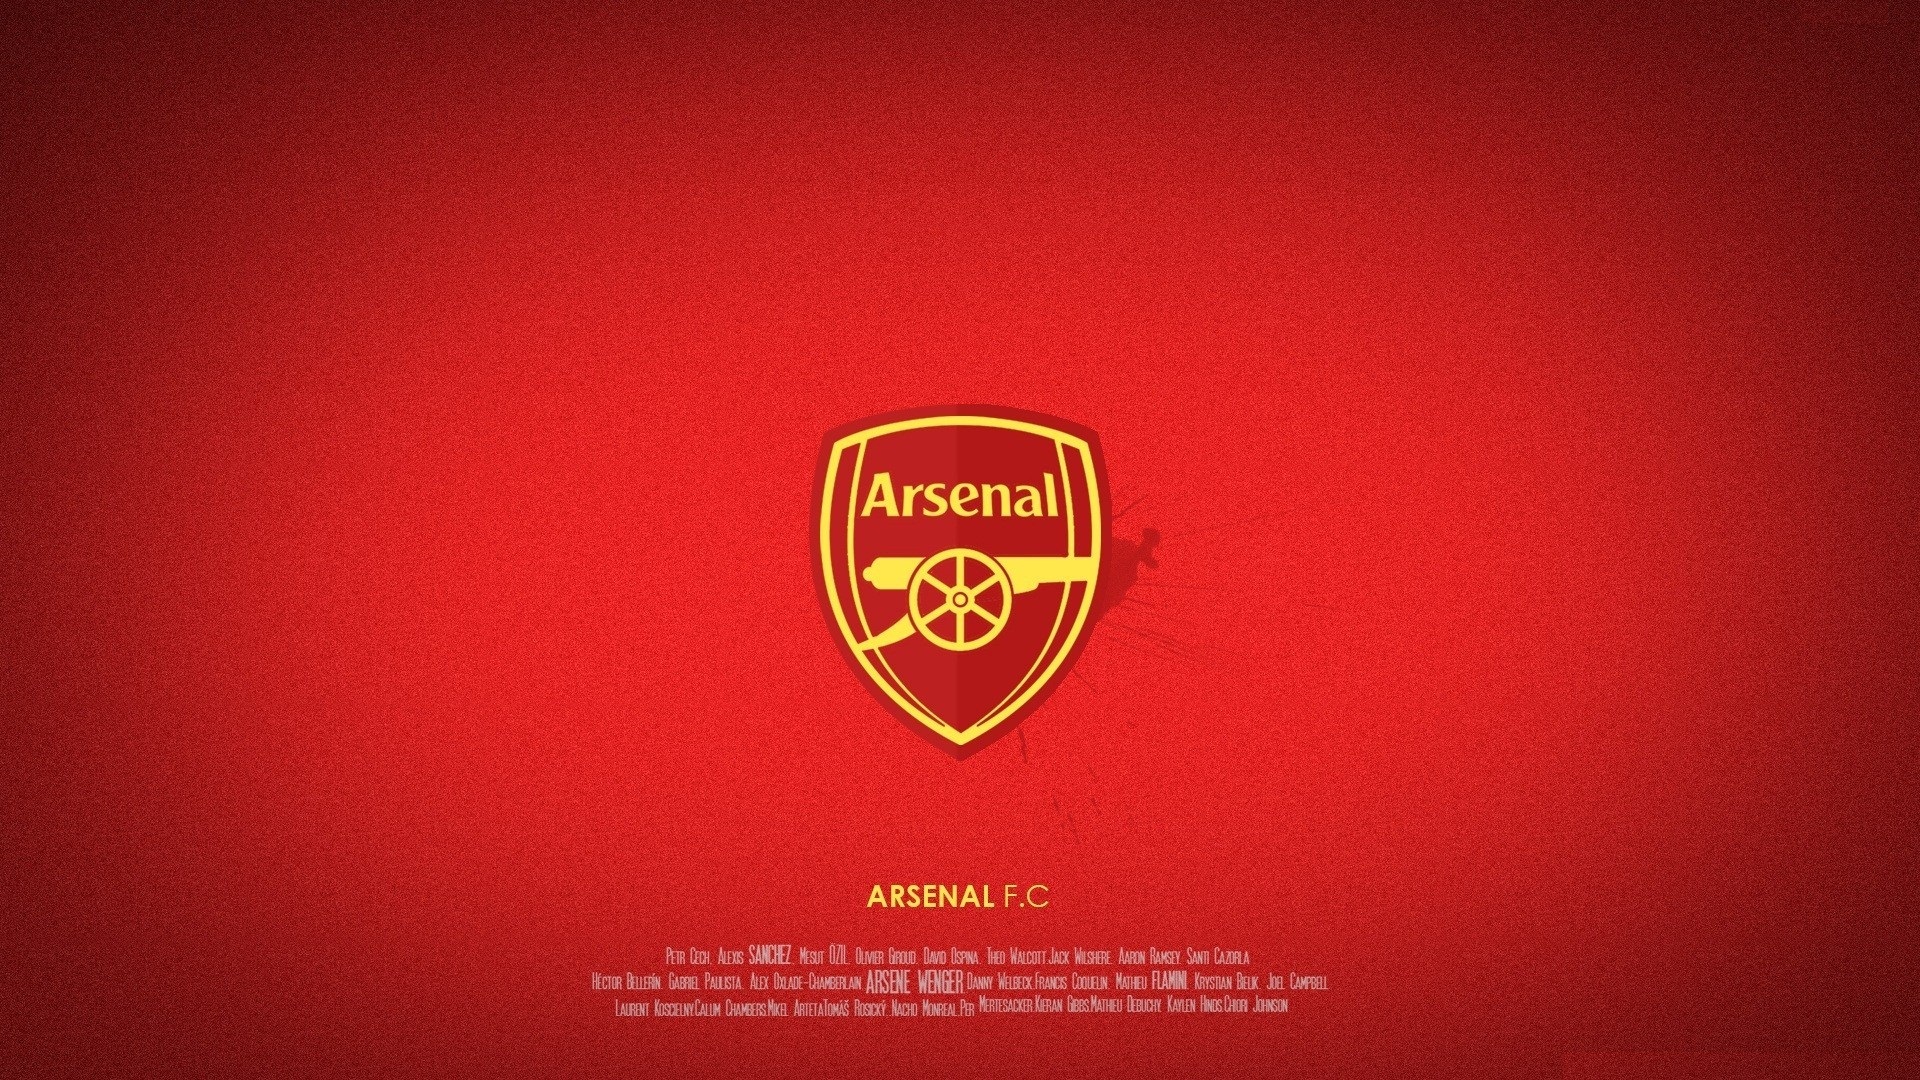 Arsenal Football Club Wallpaper With Resolution 1920X1080 pixel. You can make this wallpaper for your Mac or Windows Desktop Background, iPhone, Android or Tablet and another Smartphone device for free